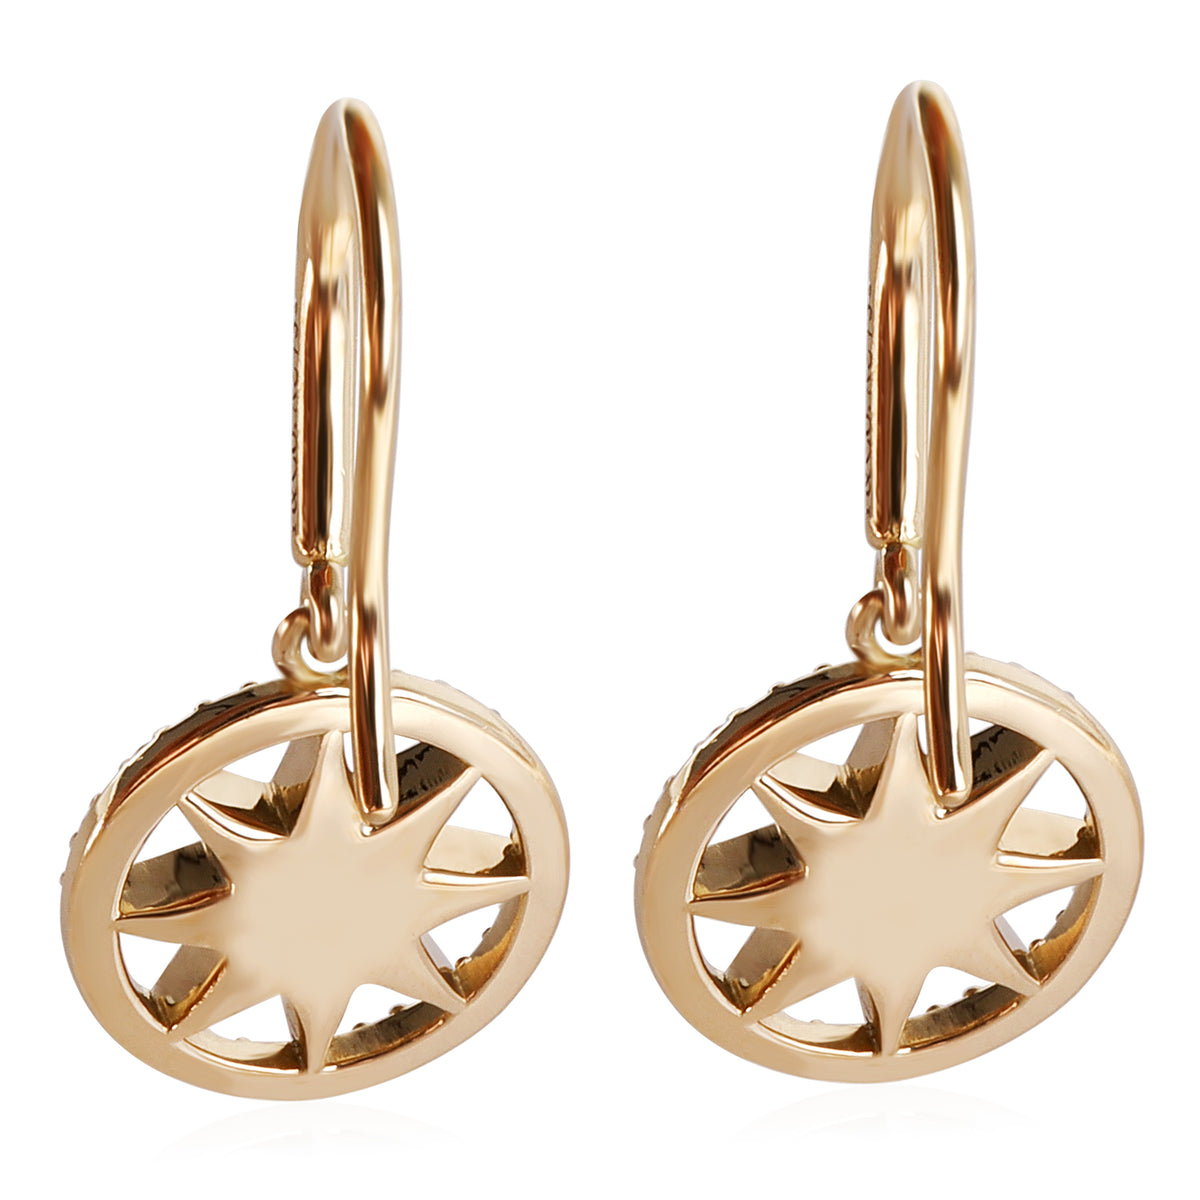 Tiffany & Co. Paloma Picasso Star Drop Diamond Earring in 18kt Gold 0.12 CTW